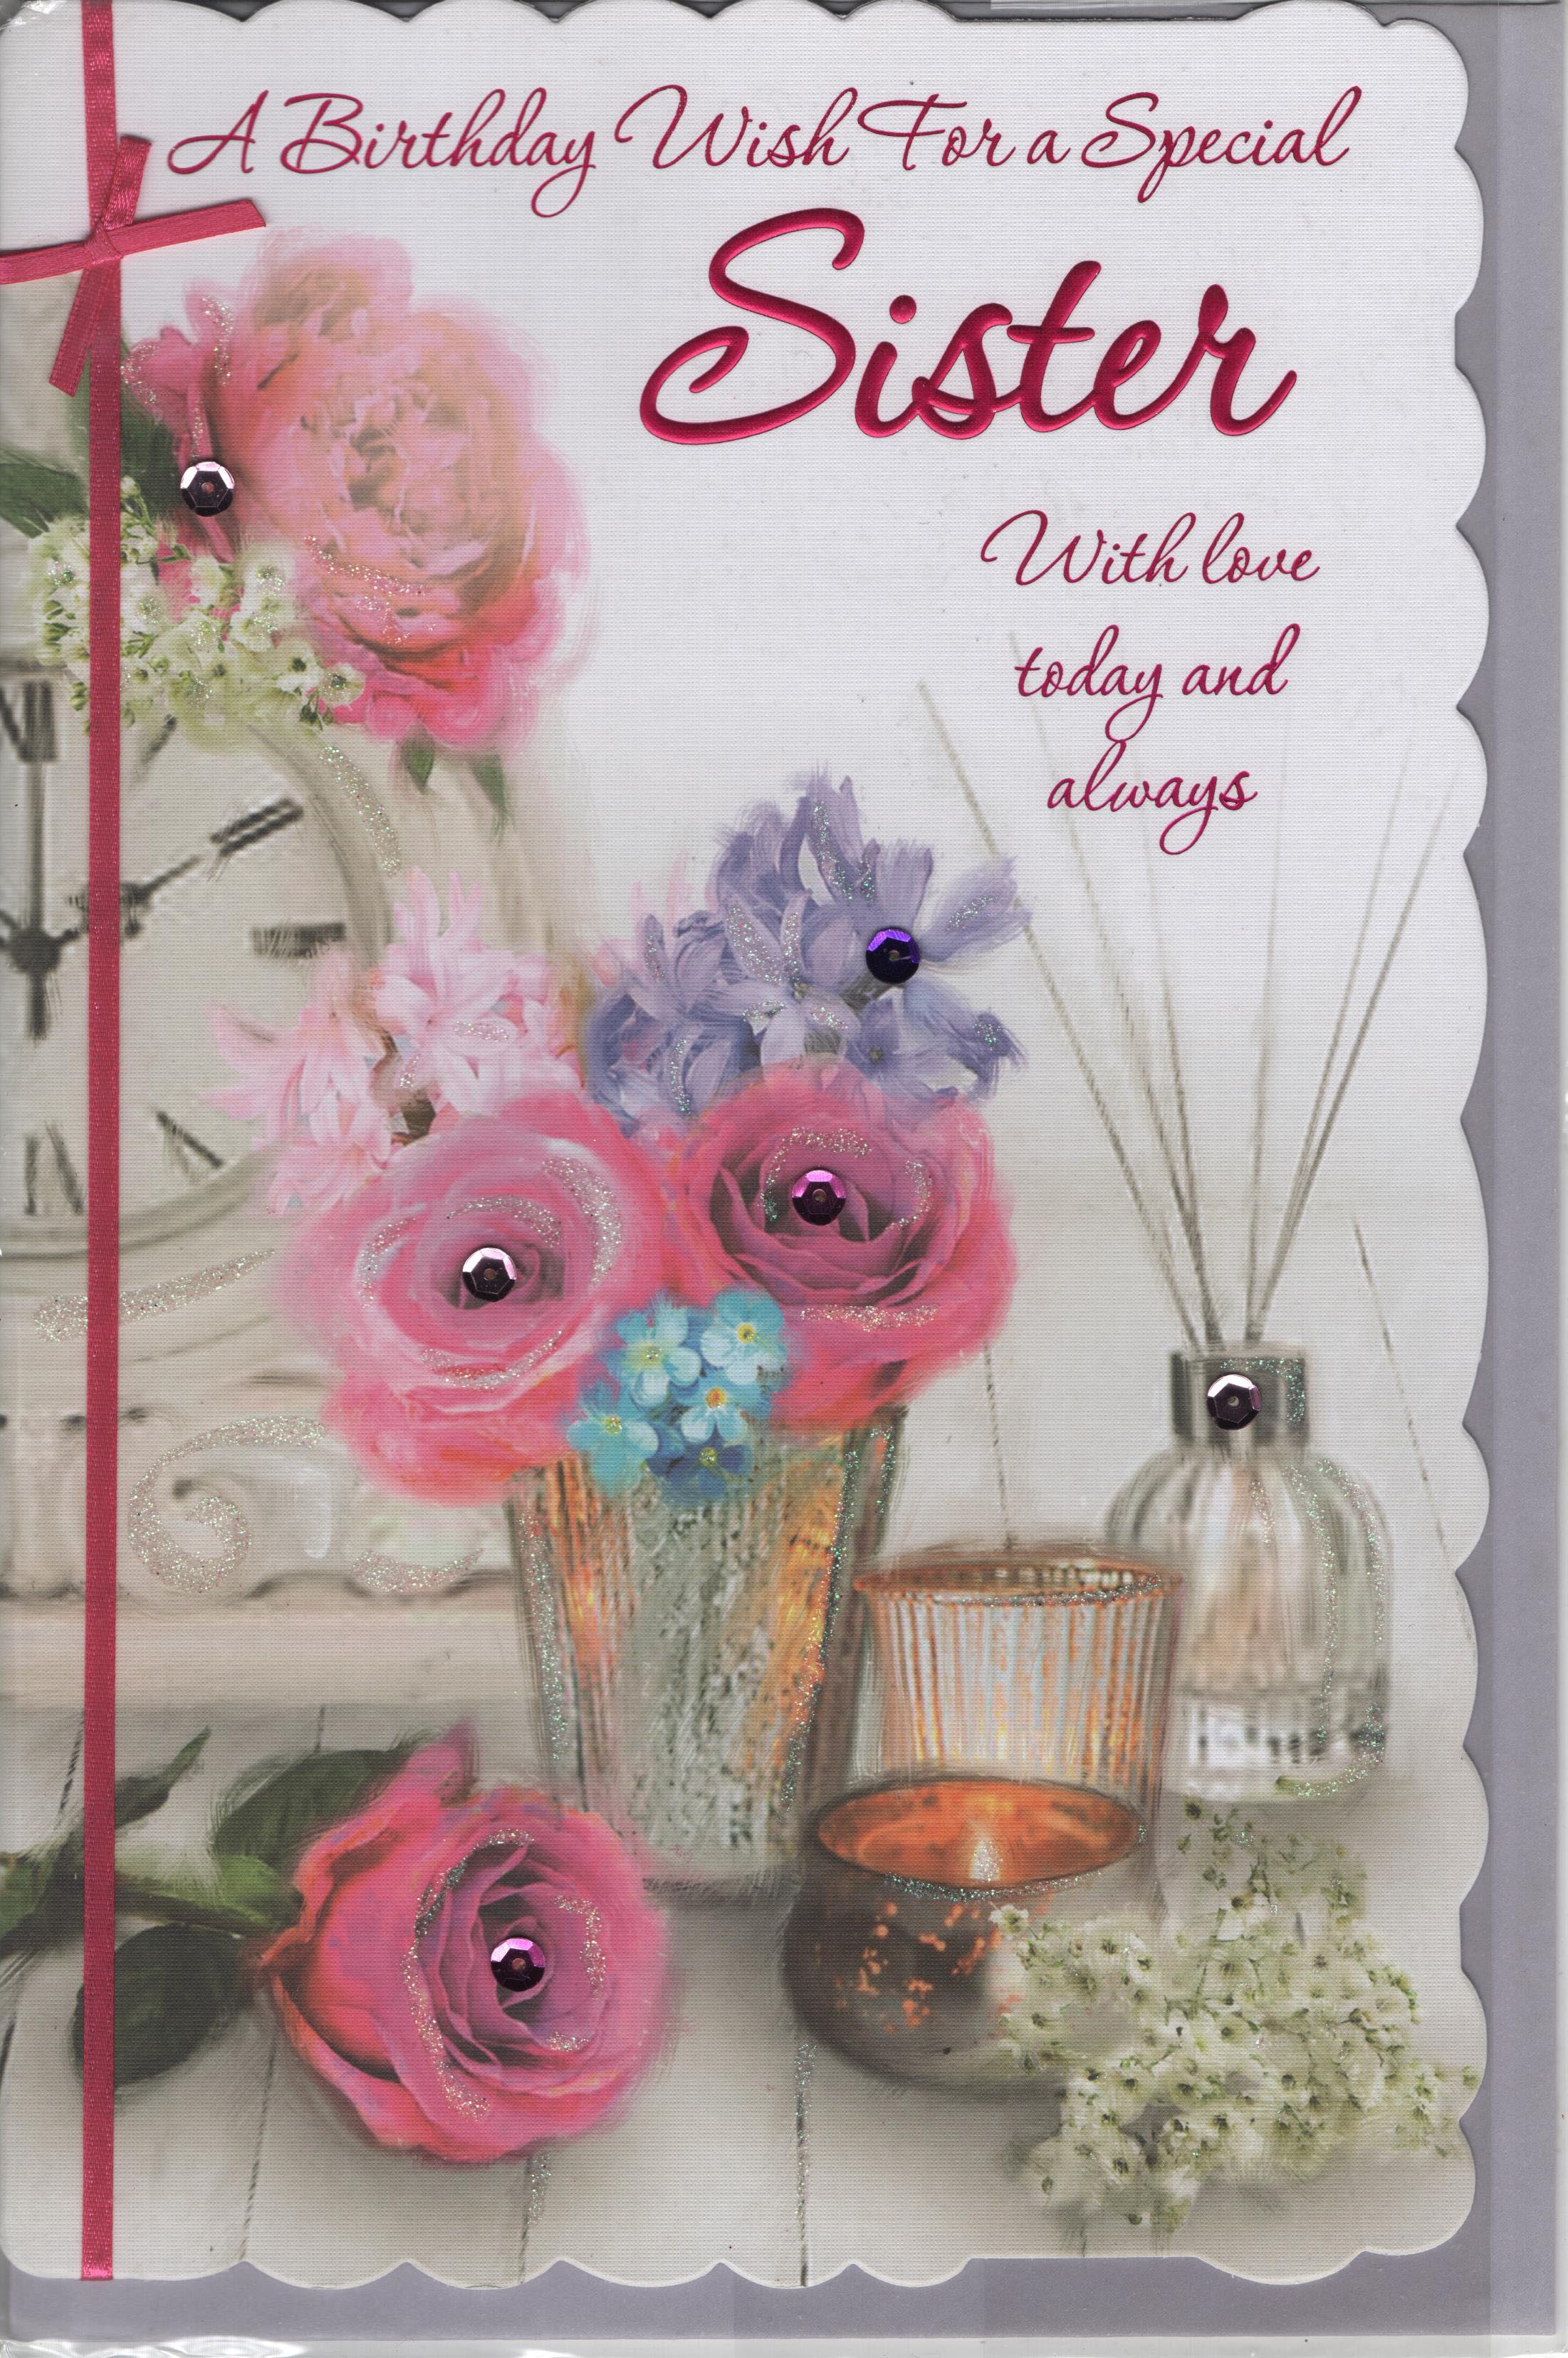 A Birthday Wish For a Special Sister With Love Today and Always Greeting Card